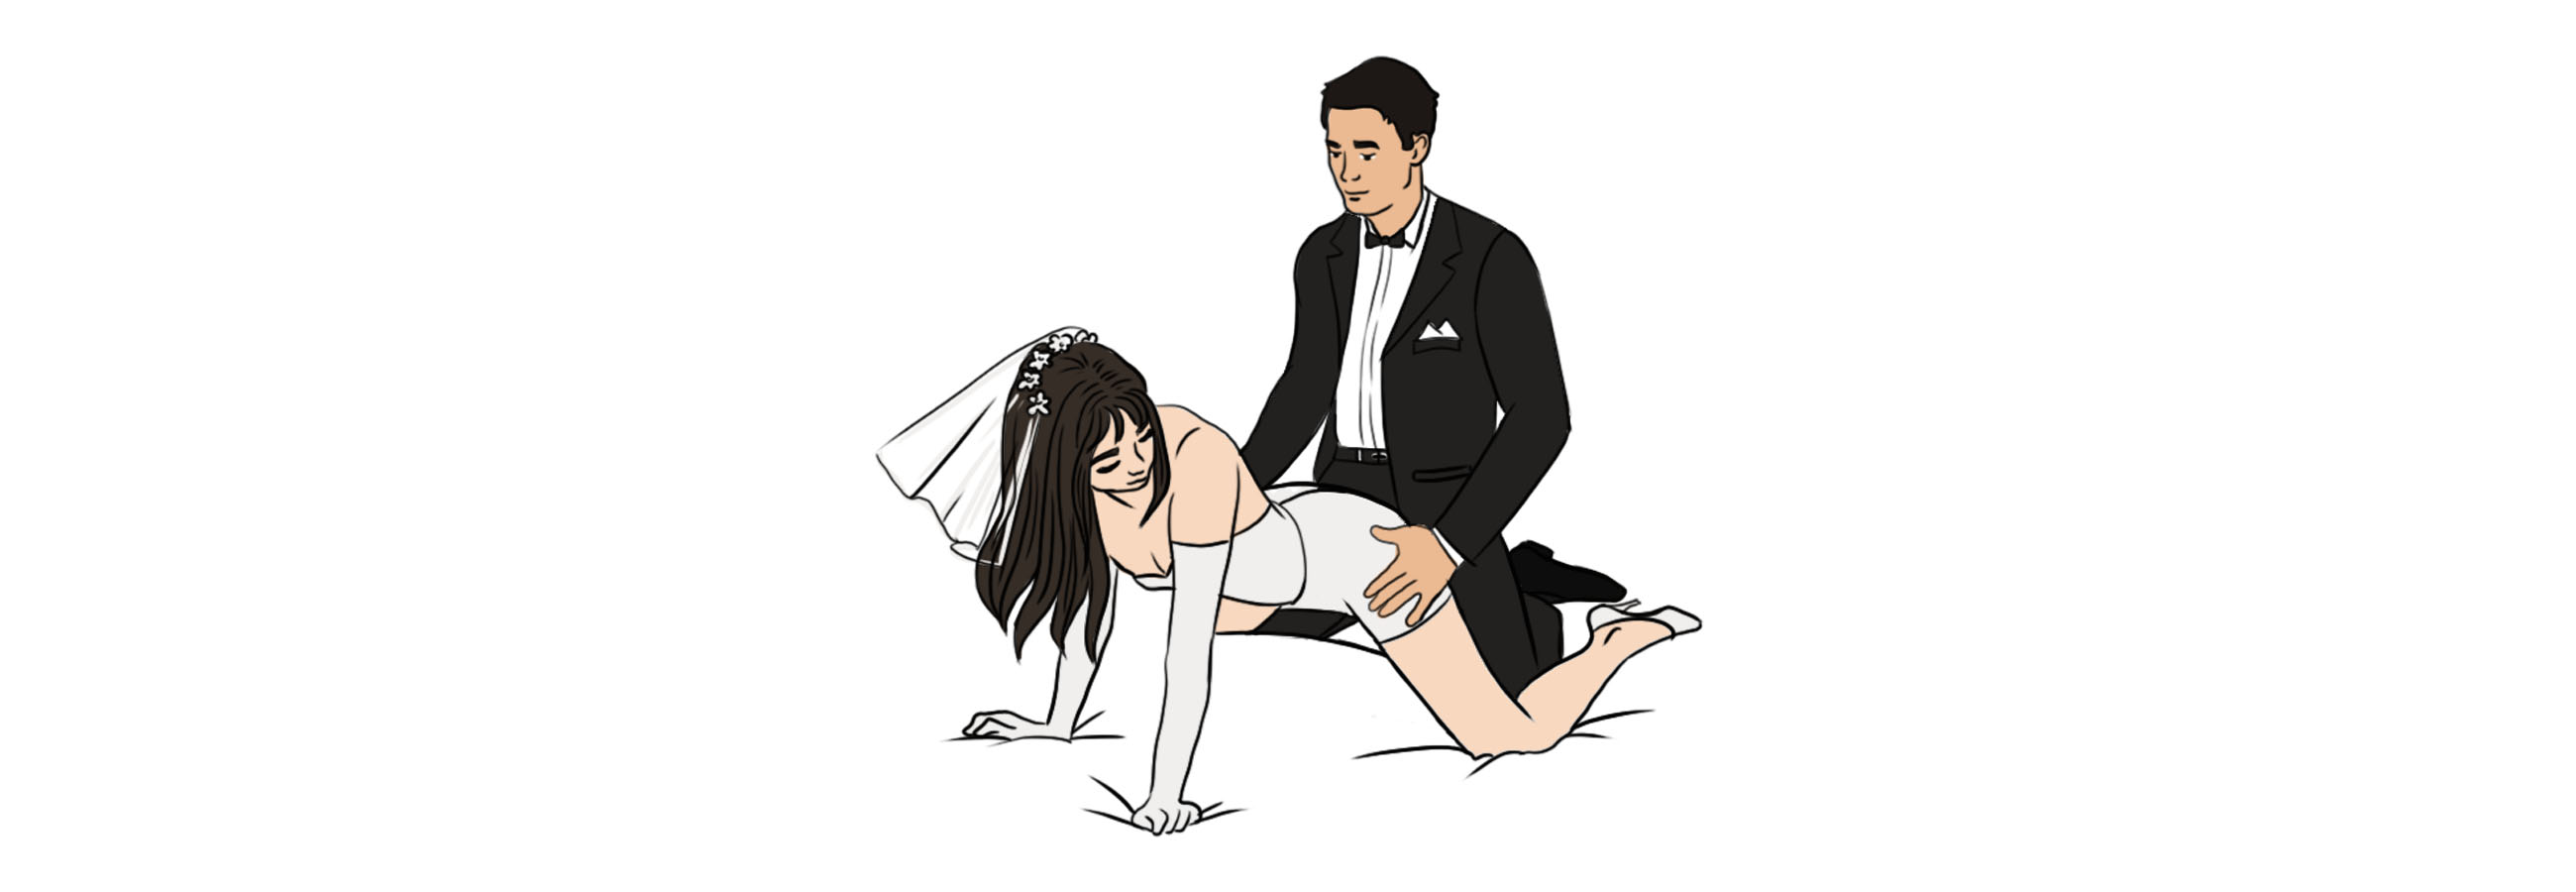 sexual images for married couples